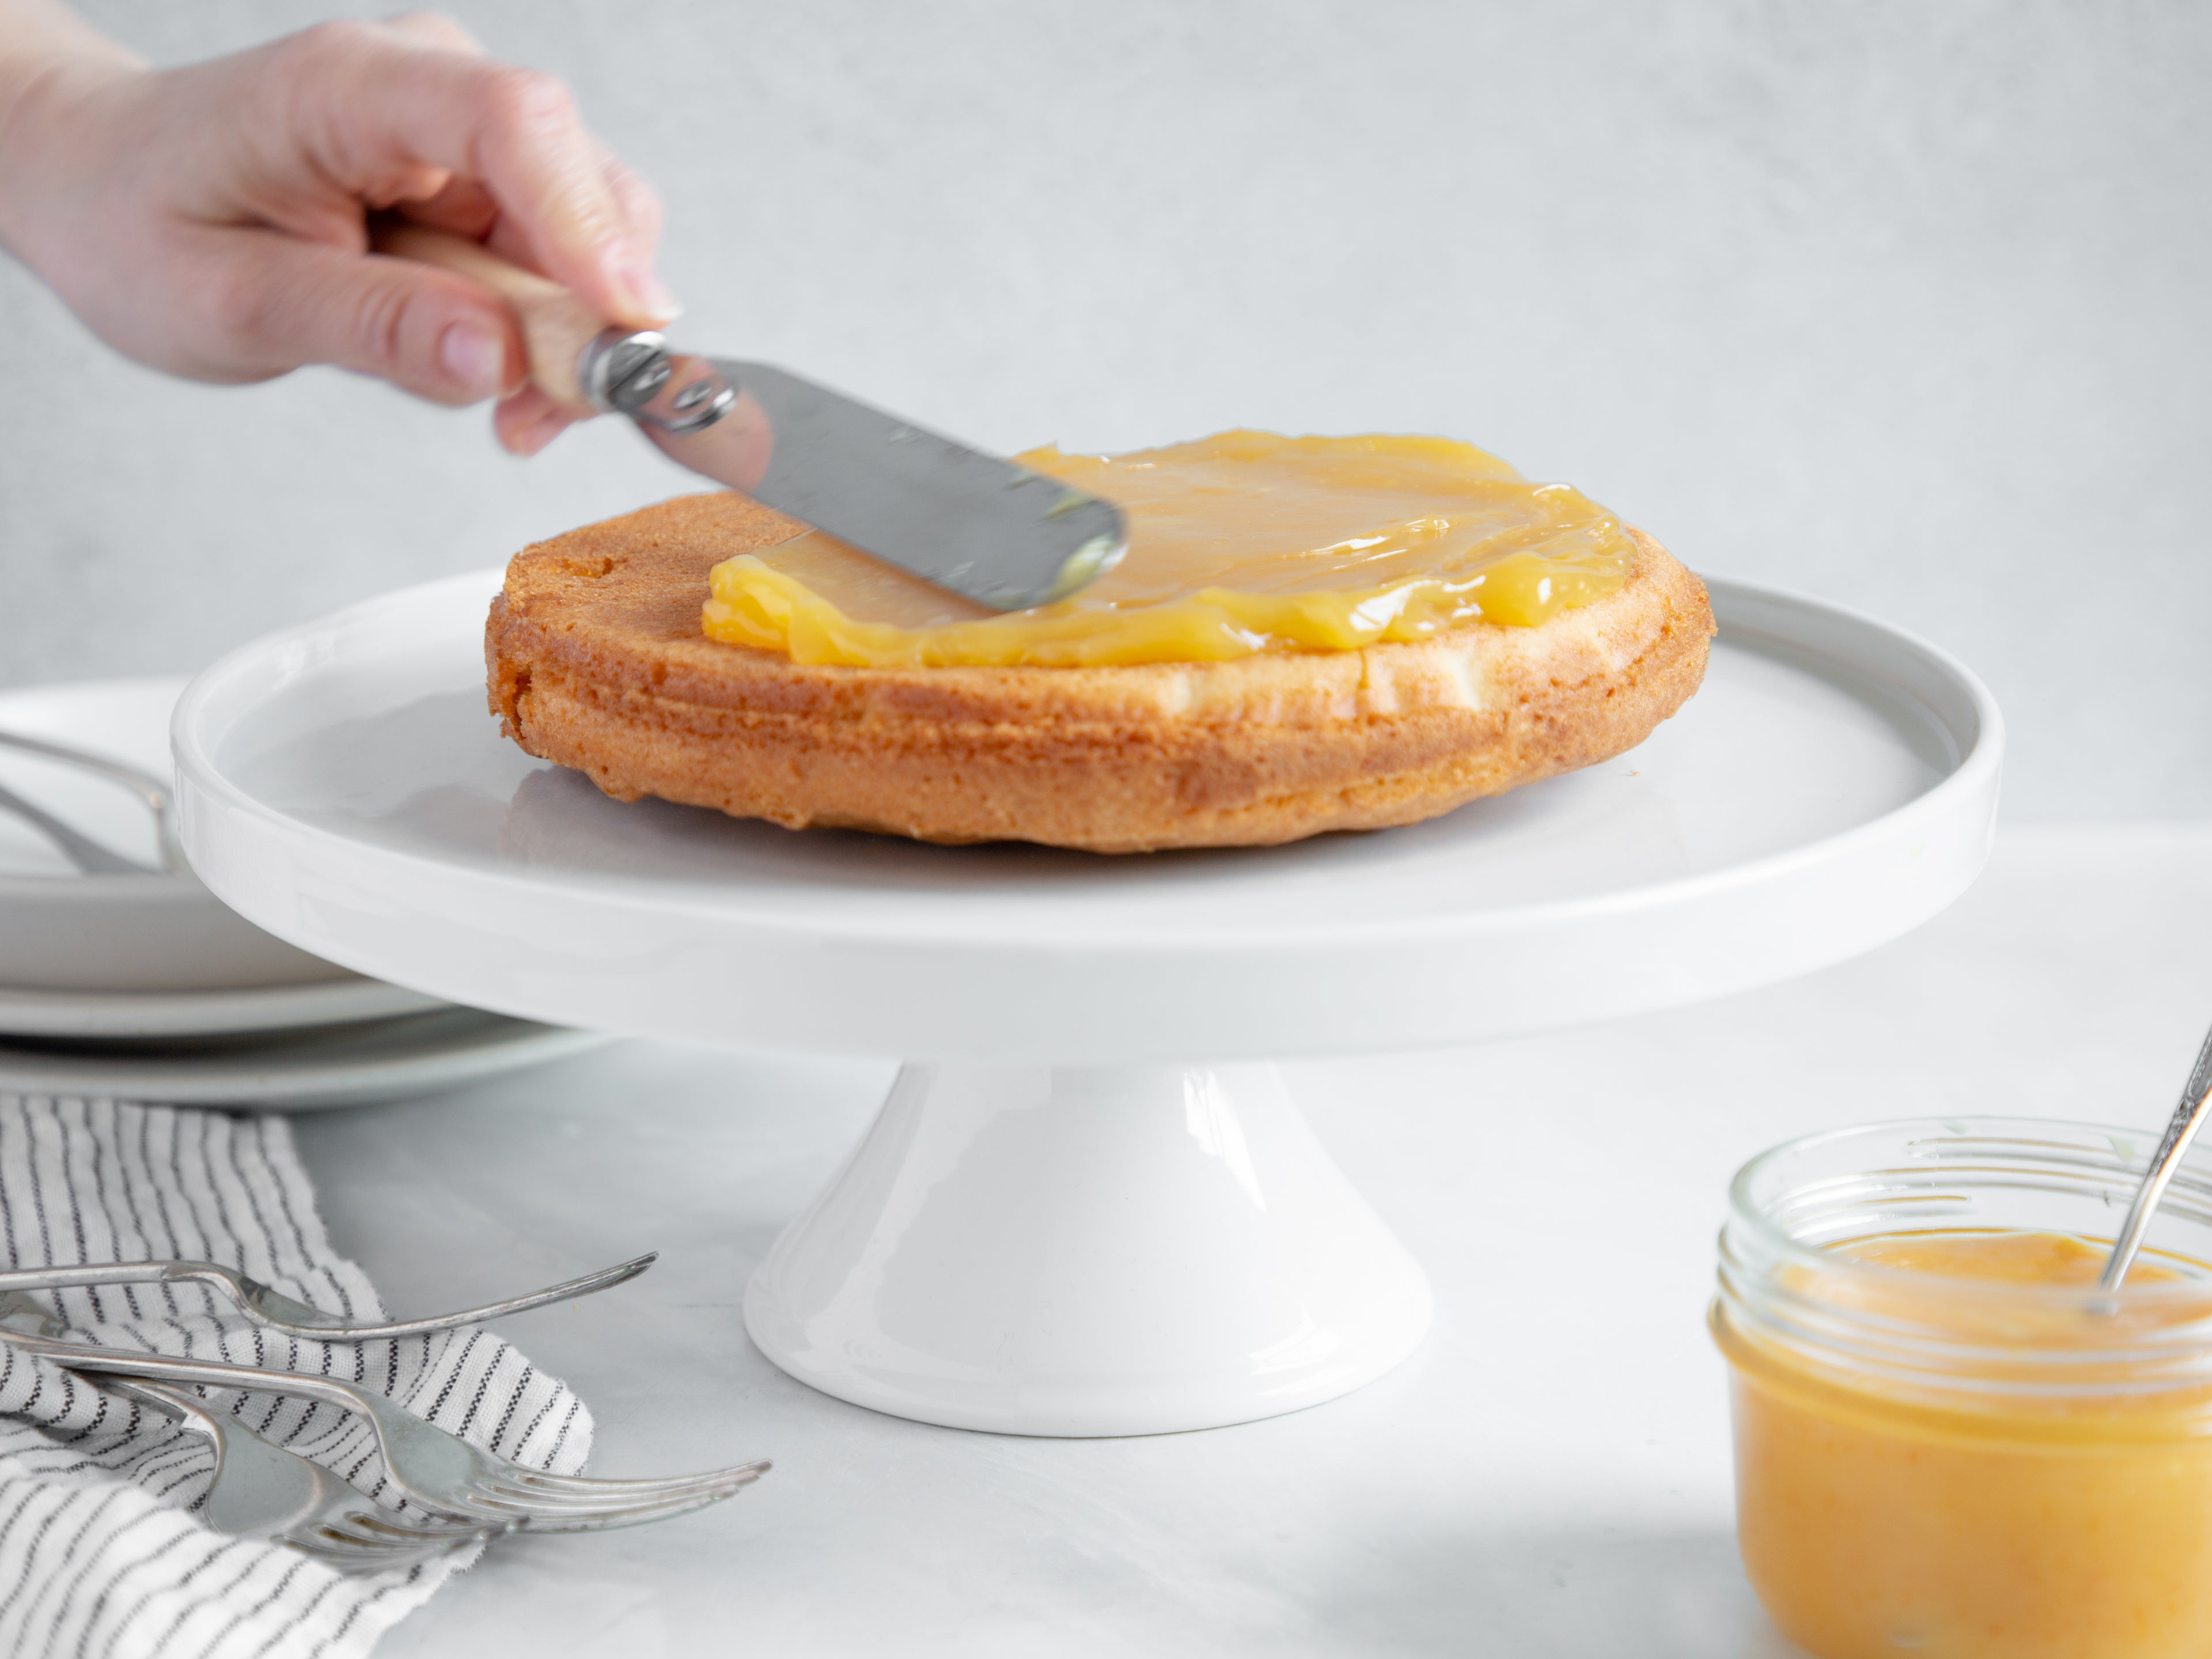 Classic Lemon Cake layer being smothered in lemon curd with a hand holding an offset spatula